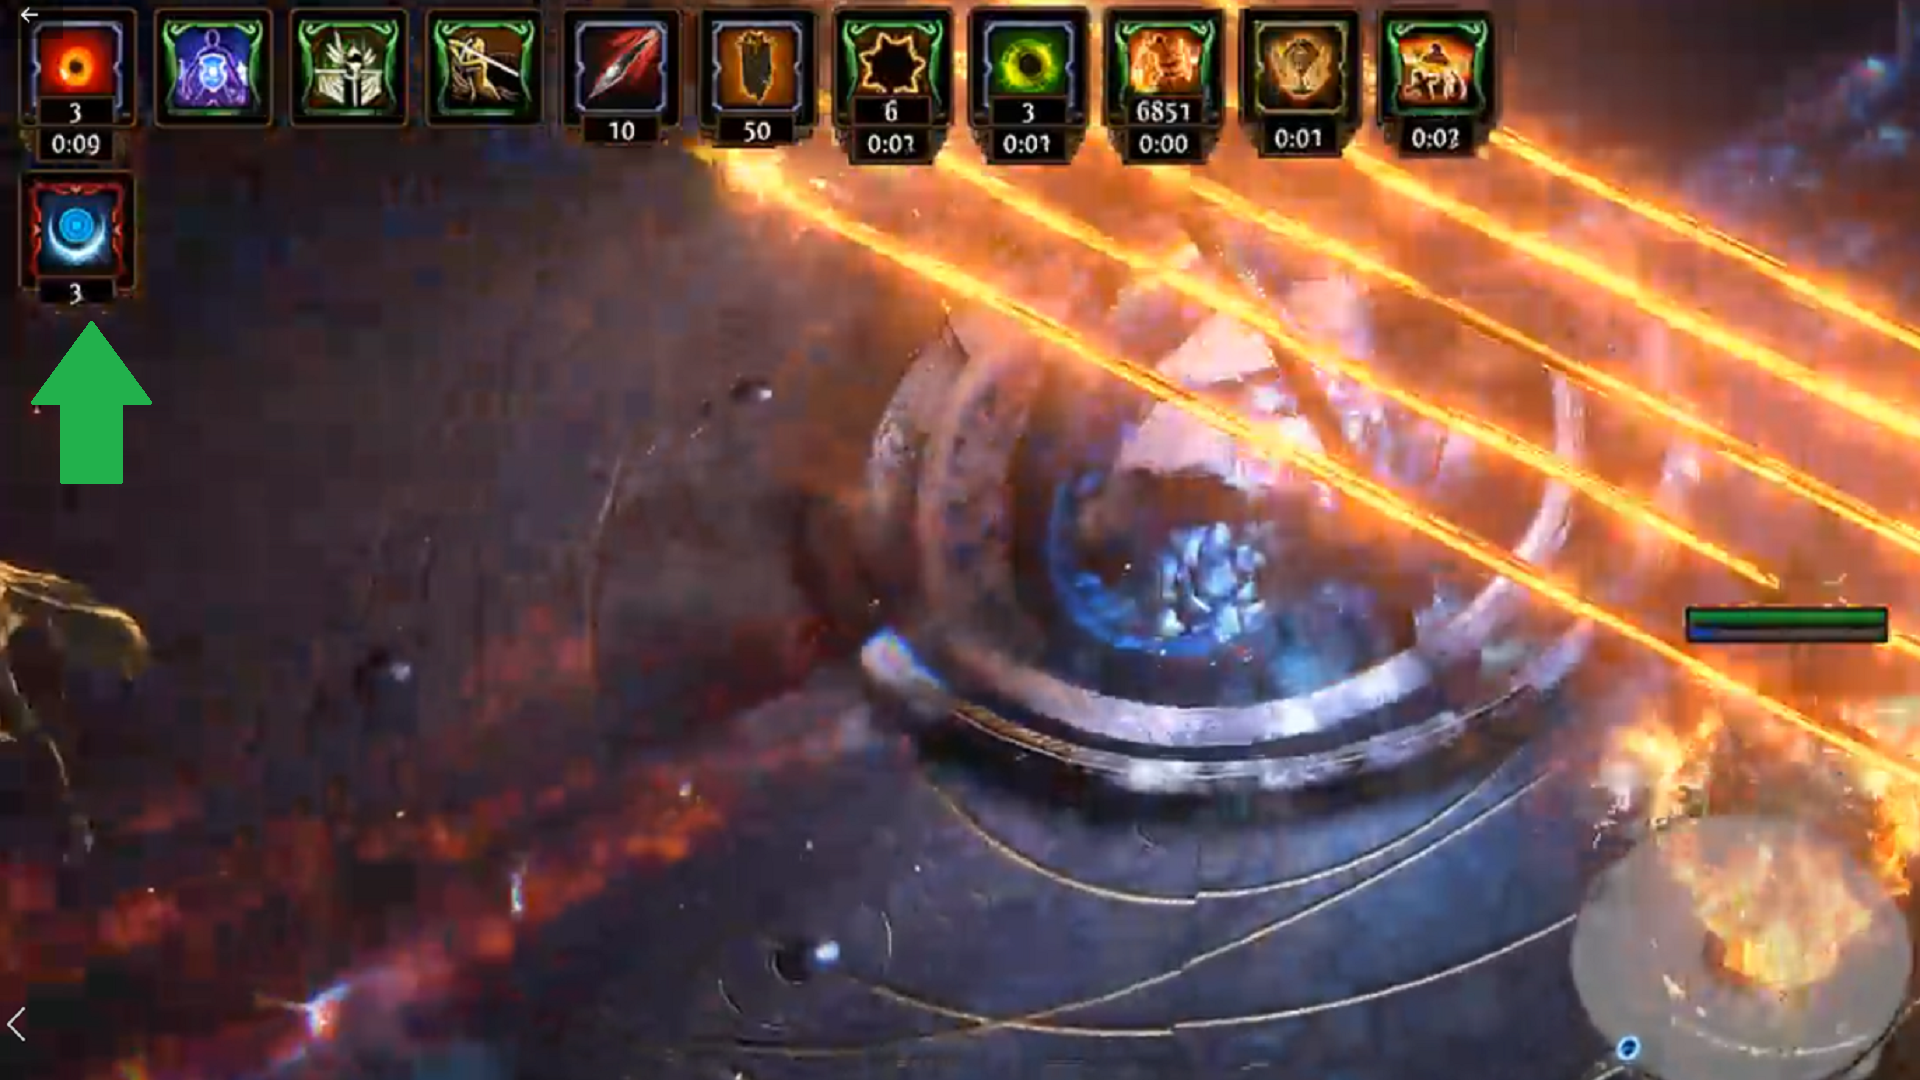 A Solar Storm attack from the Black Star boss in Path Of Exile